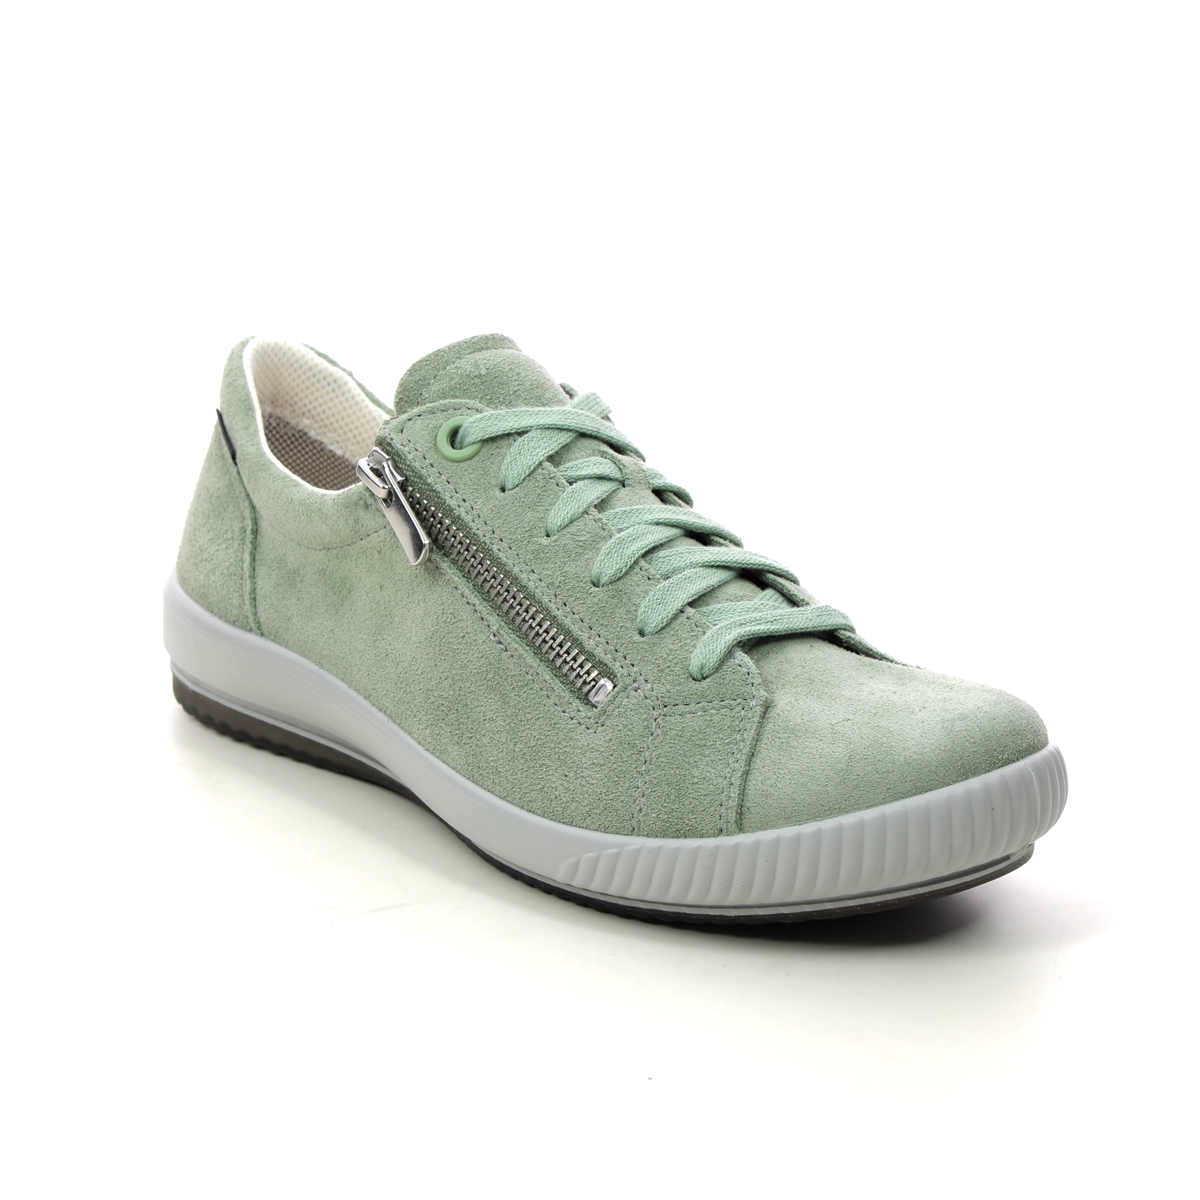 Legero Tanaro 5 Gtx Mint Suede Womens Lacing Shoes 2000219-7200 In Size 6.5 In Plain Mint Suede